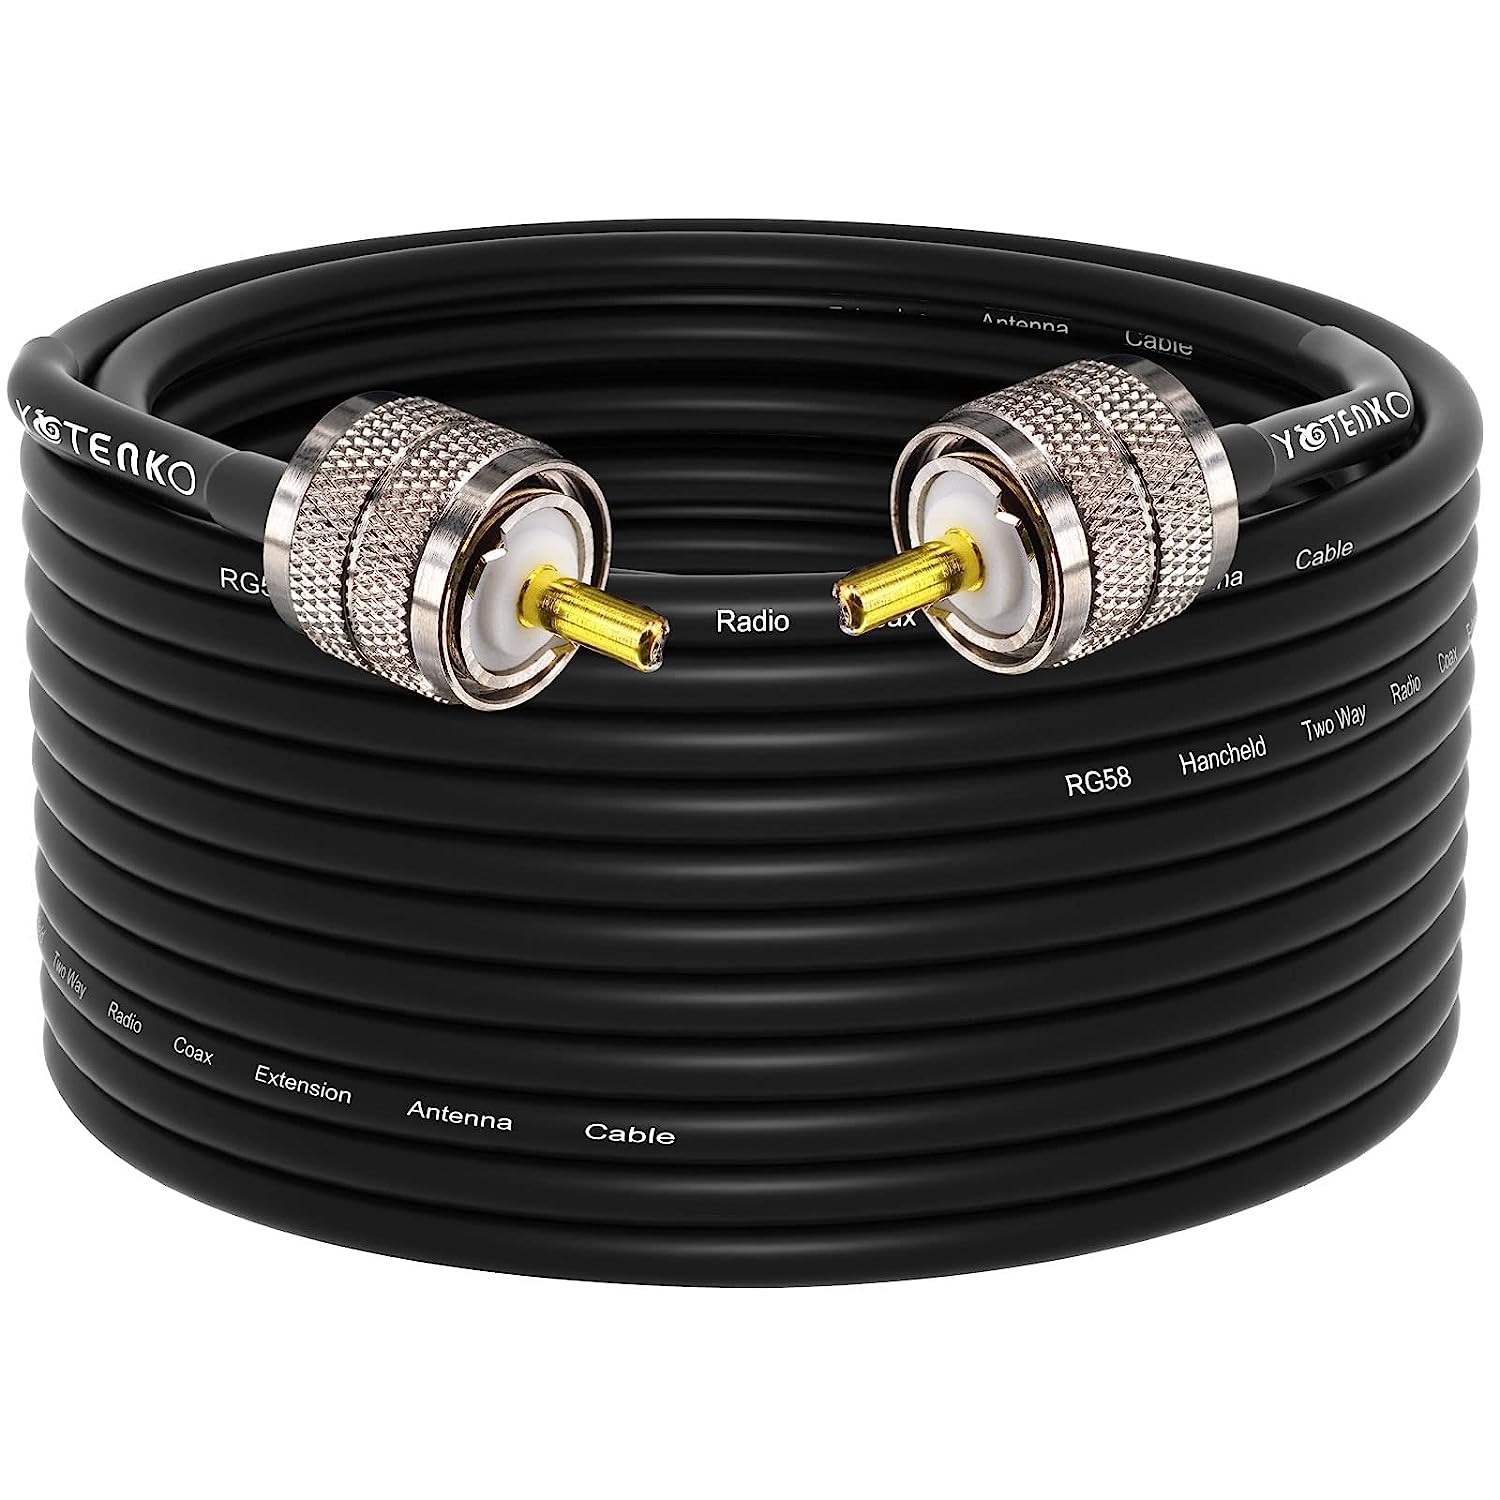 YOTENKO CB Coax Cable,RG58 Coaxial Cable 49.2ft,UHF [...]